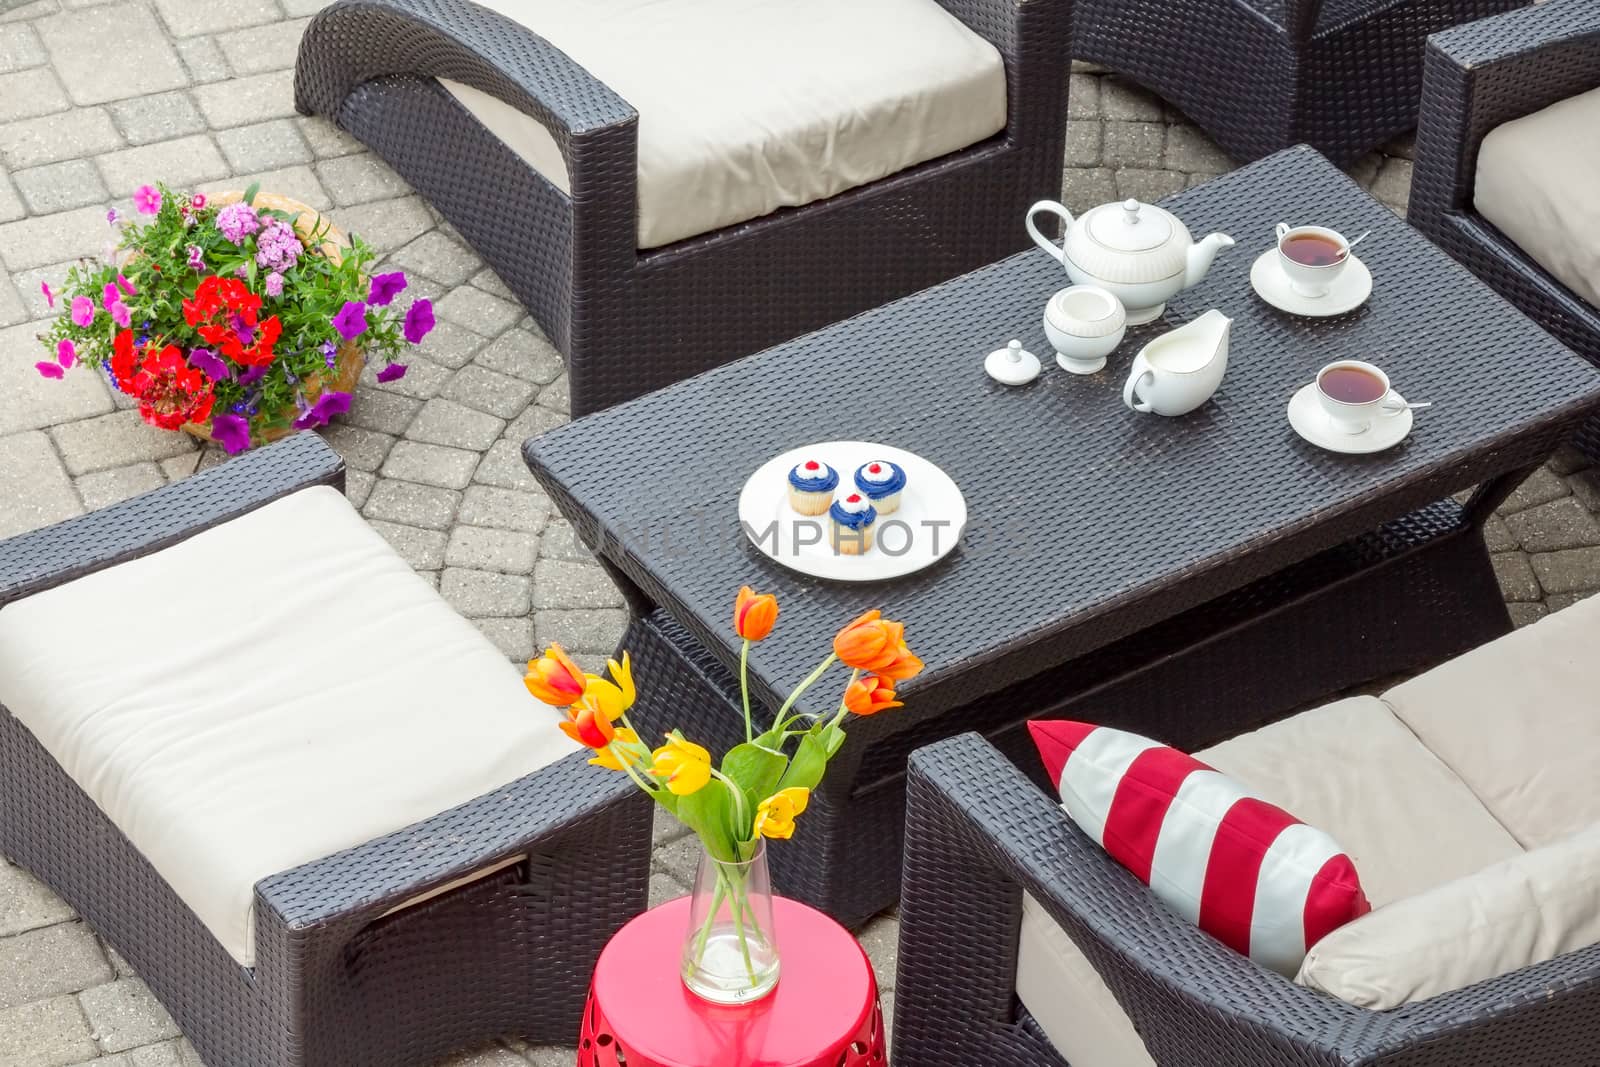 4th July tea served on an outdoor patio with patriotic cupcakes and cups of tea on a table surrounded by comfortable armchairs and a stool with spring tulips in a vase